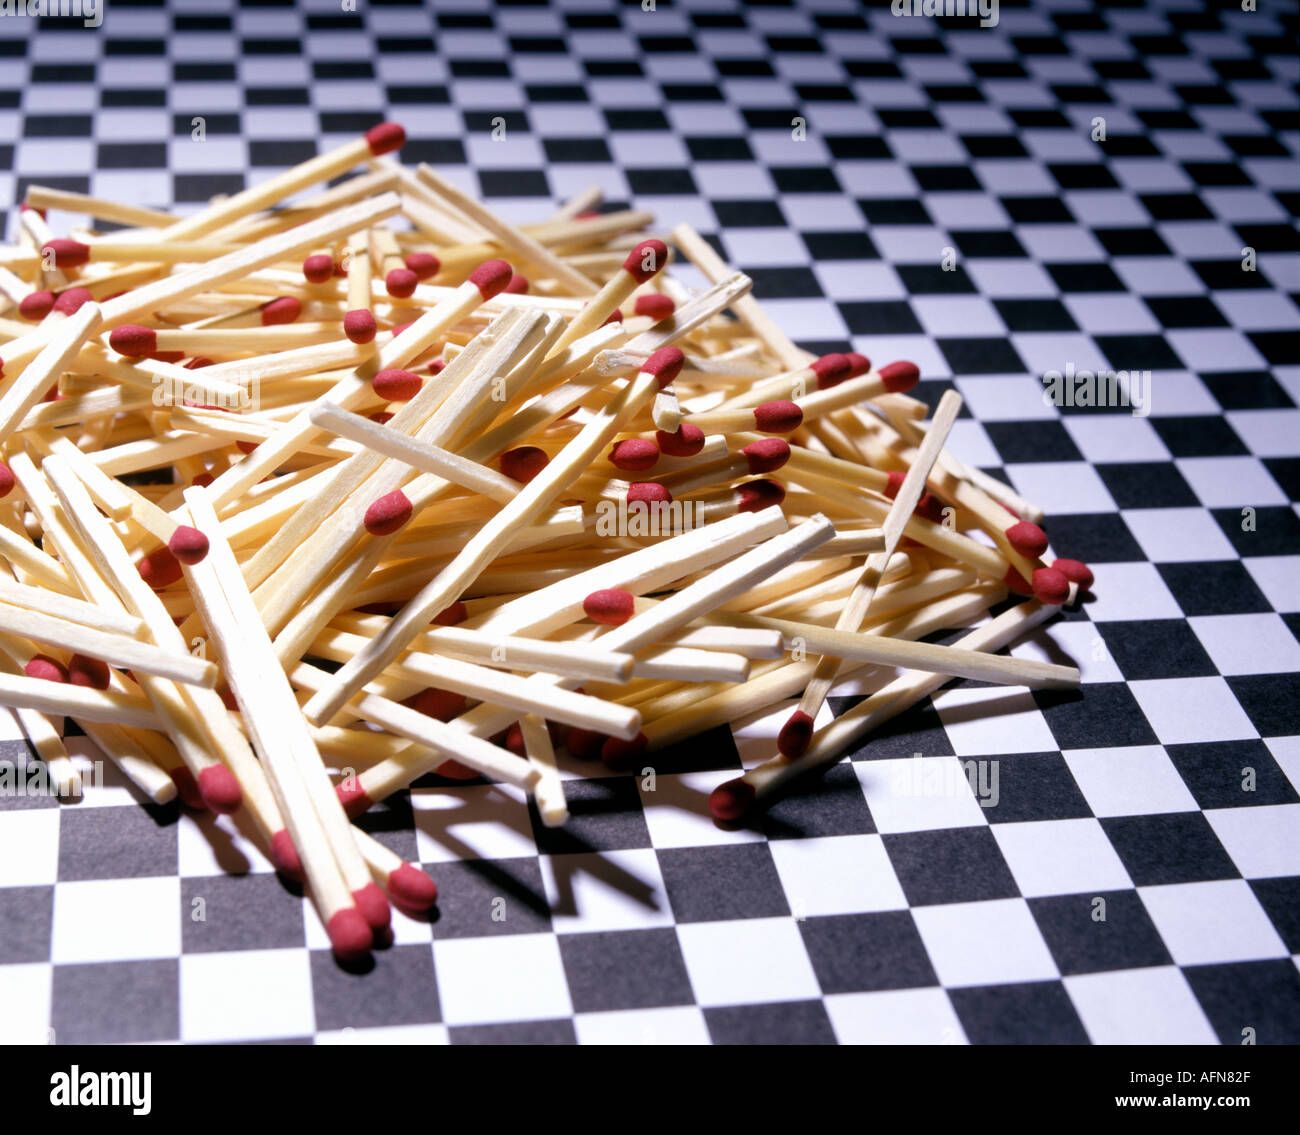 Small pile of bunch of unburned matches with red striking heads on black and white checkered background surface Stock Photo